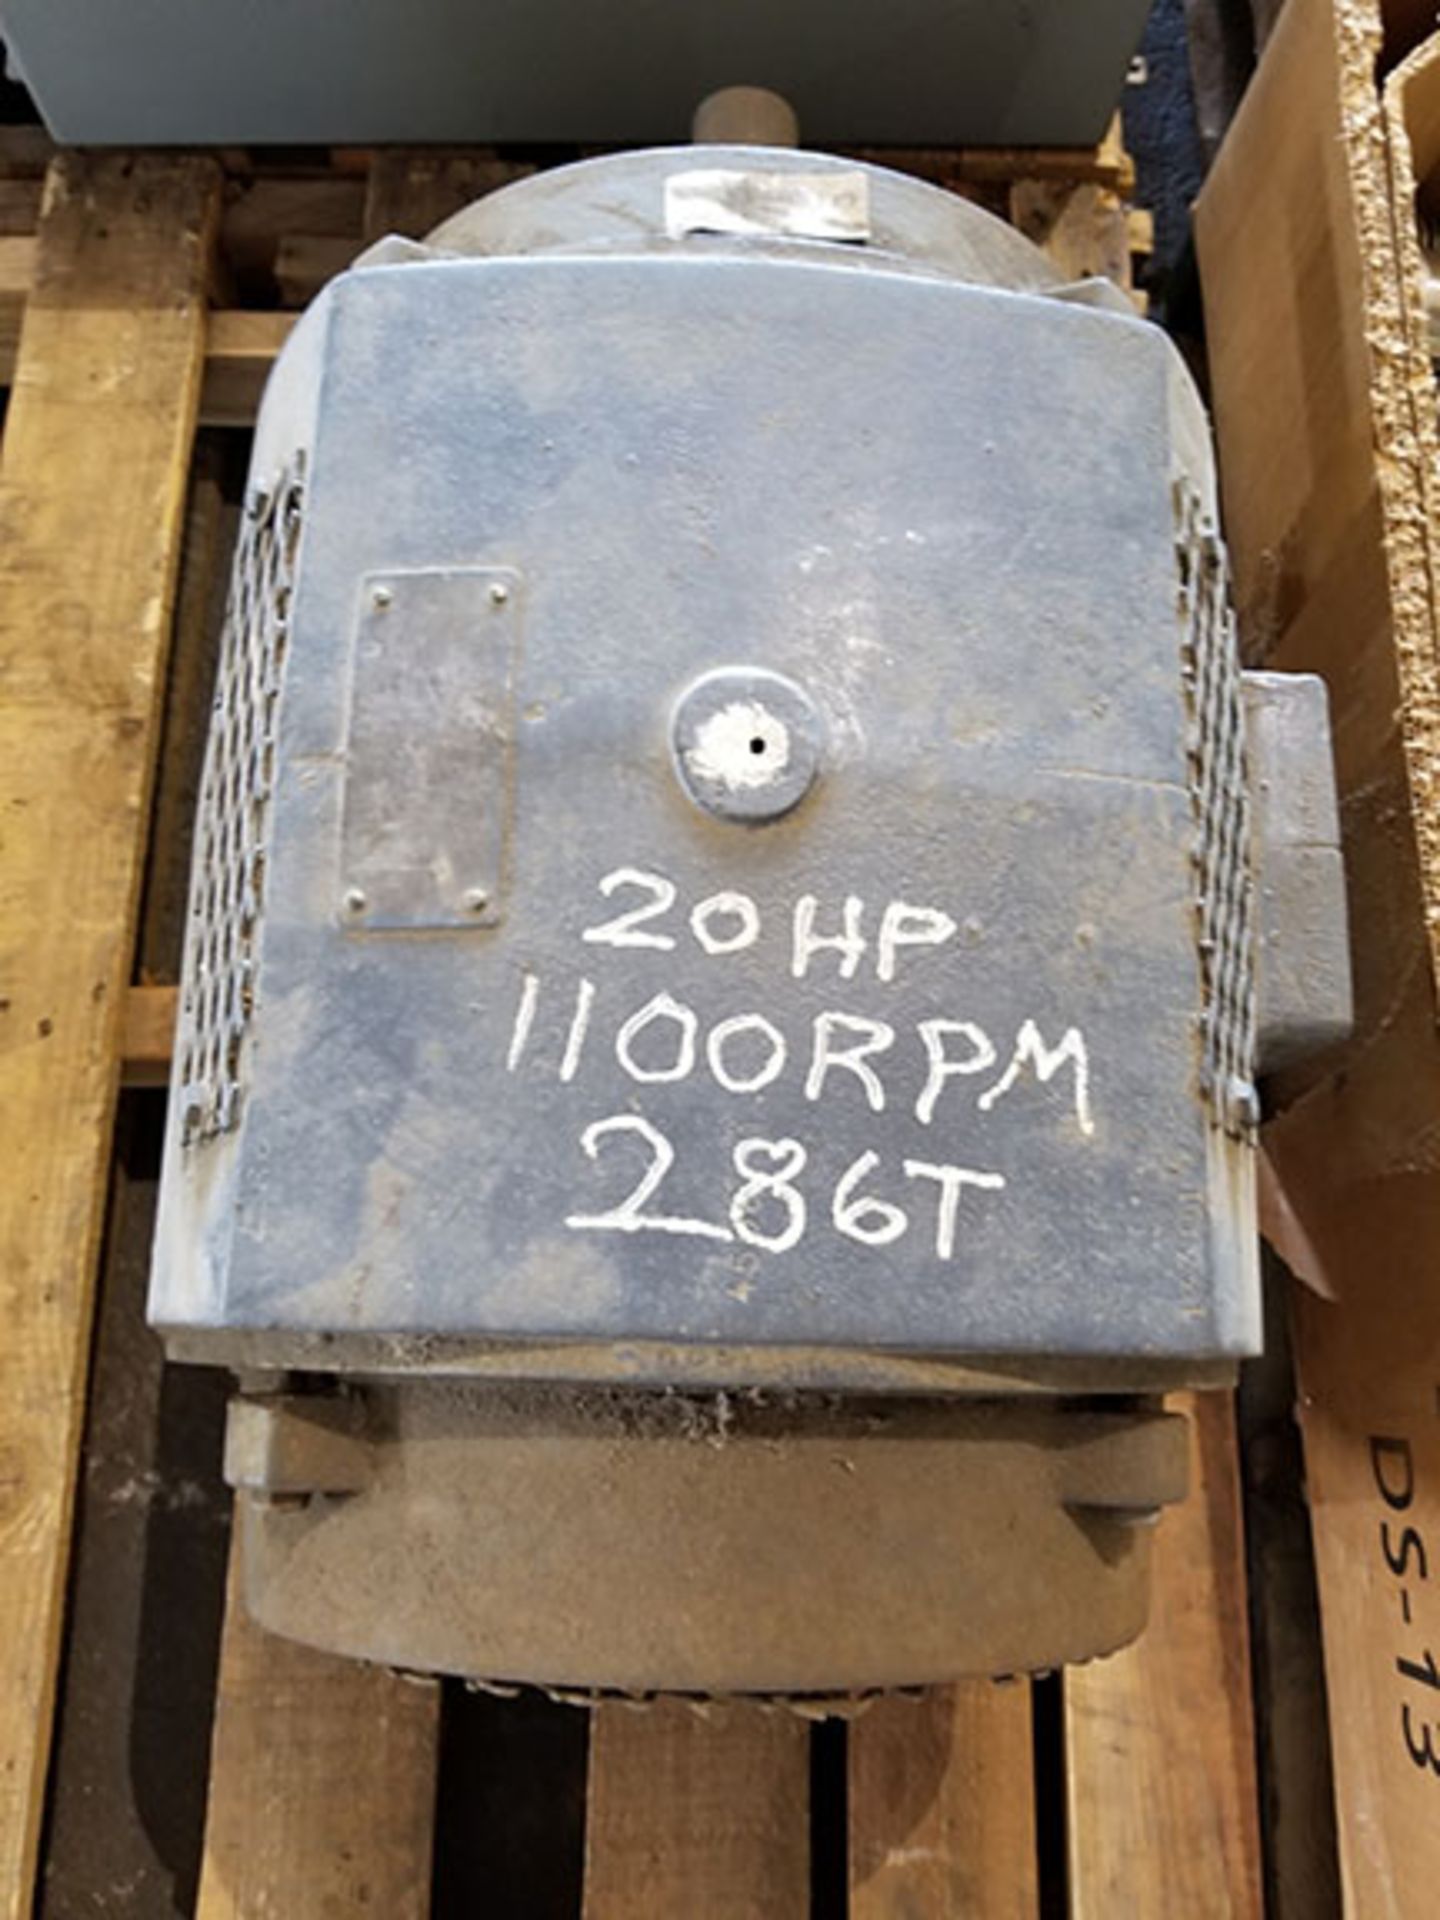 PALLET OF (2) ELECTRIC MOTORS – 20 HP, 1,100 RPM, 286T – 25 HP, 284T, 1,765 RPM - Image 4 of 5